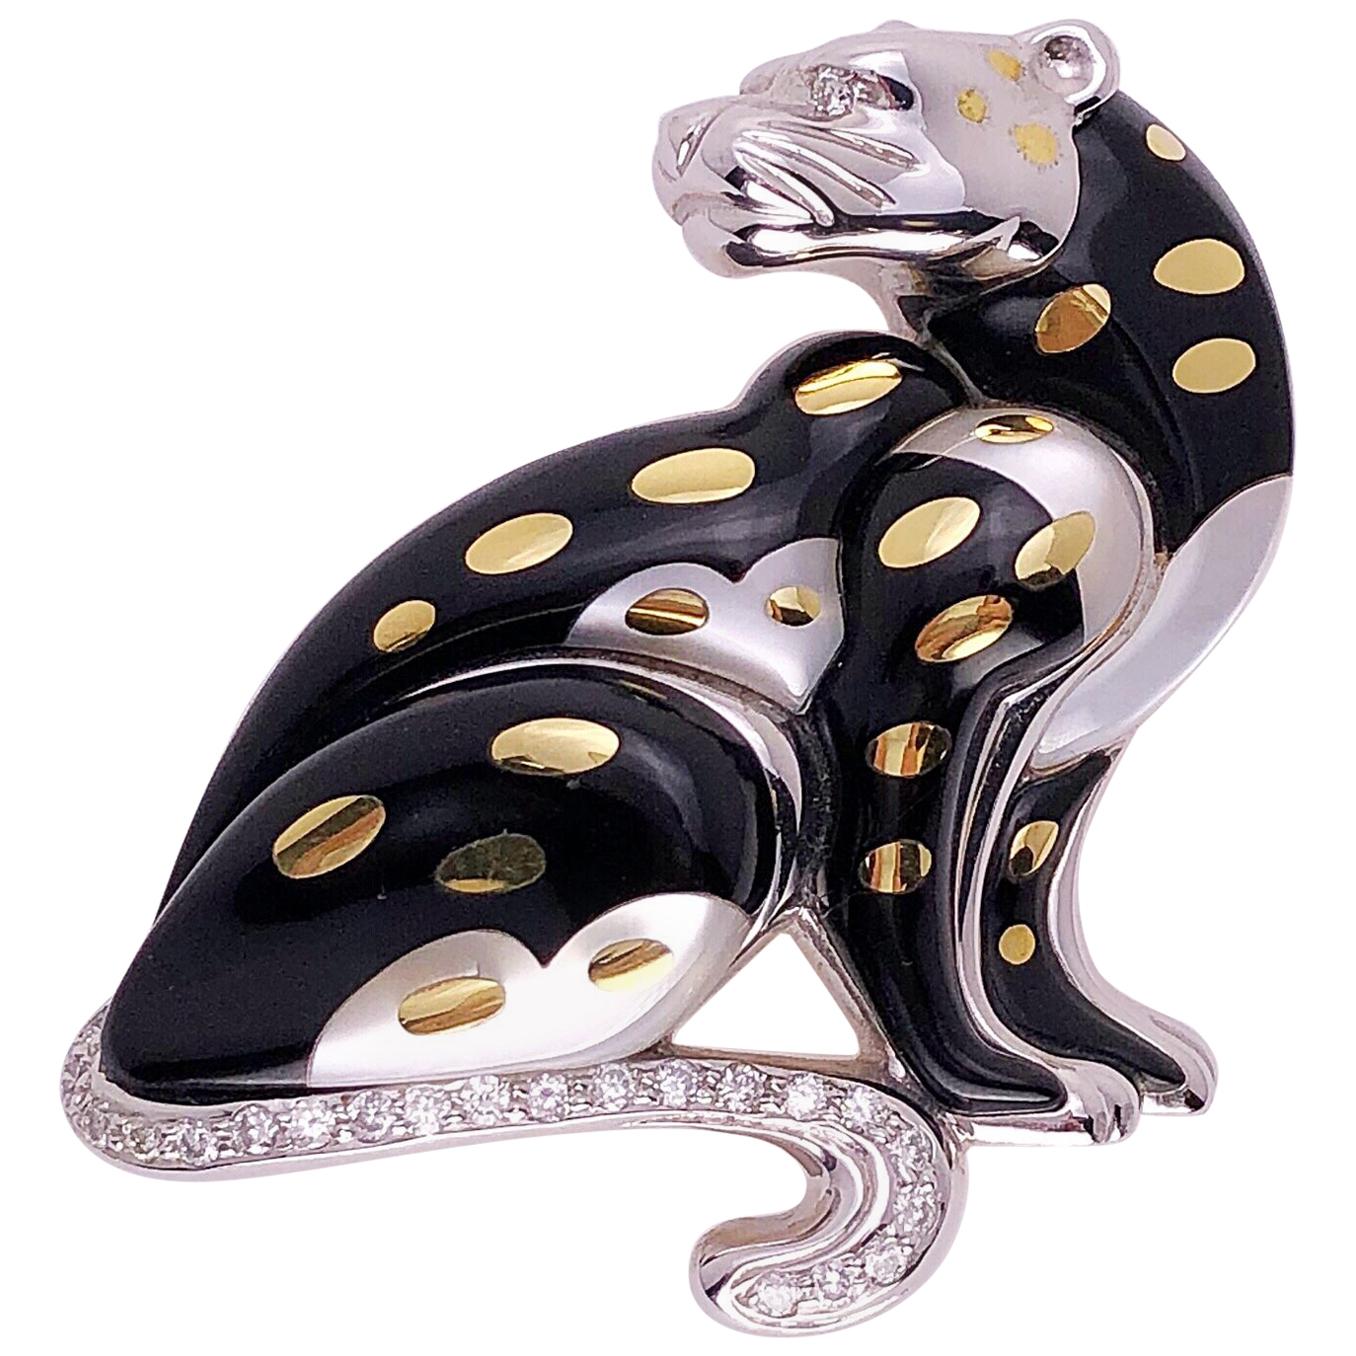 Asch Grossbardt Platinum & 18KT Gold Leopard Brooch With Onyx & Mother of Pearl For Sale